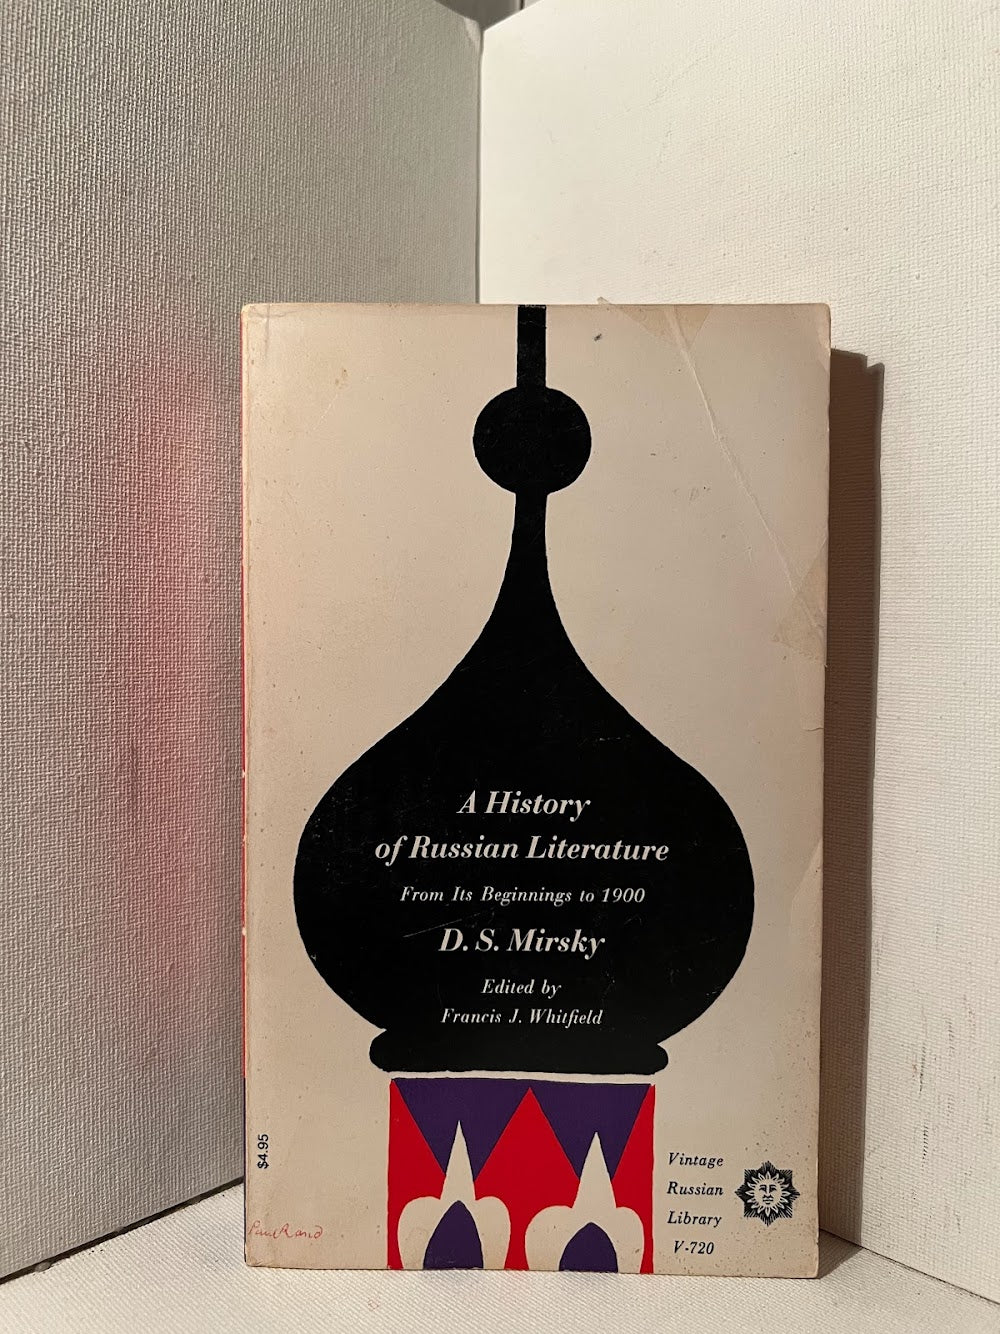 A History of Russian Literature by D.S. Mirsky